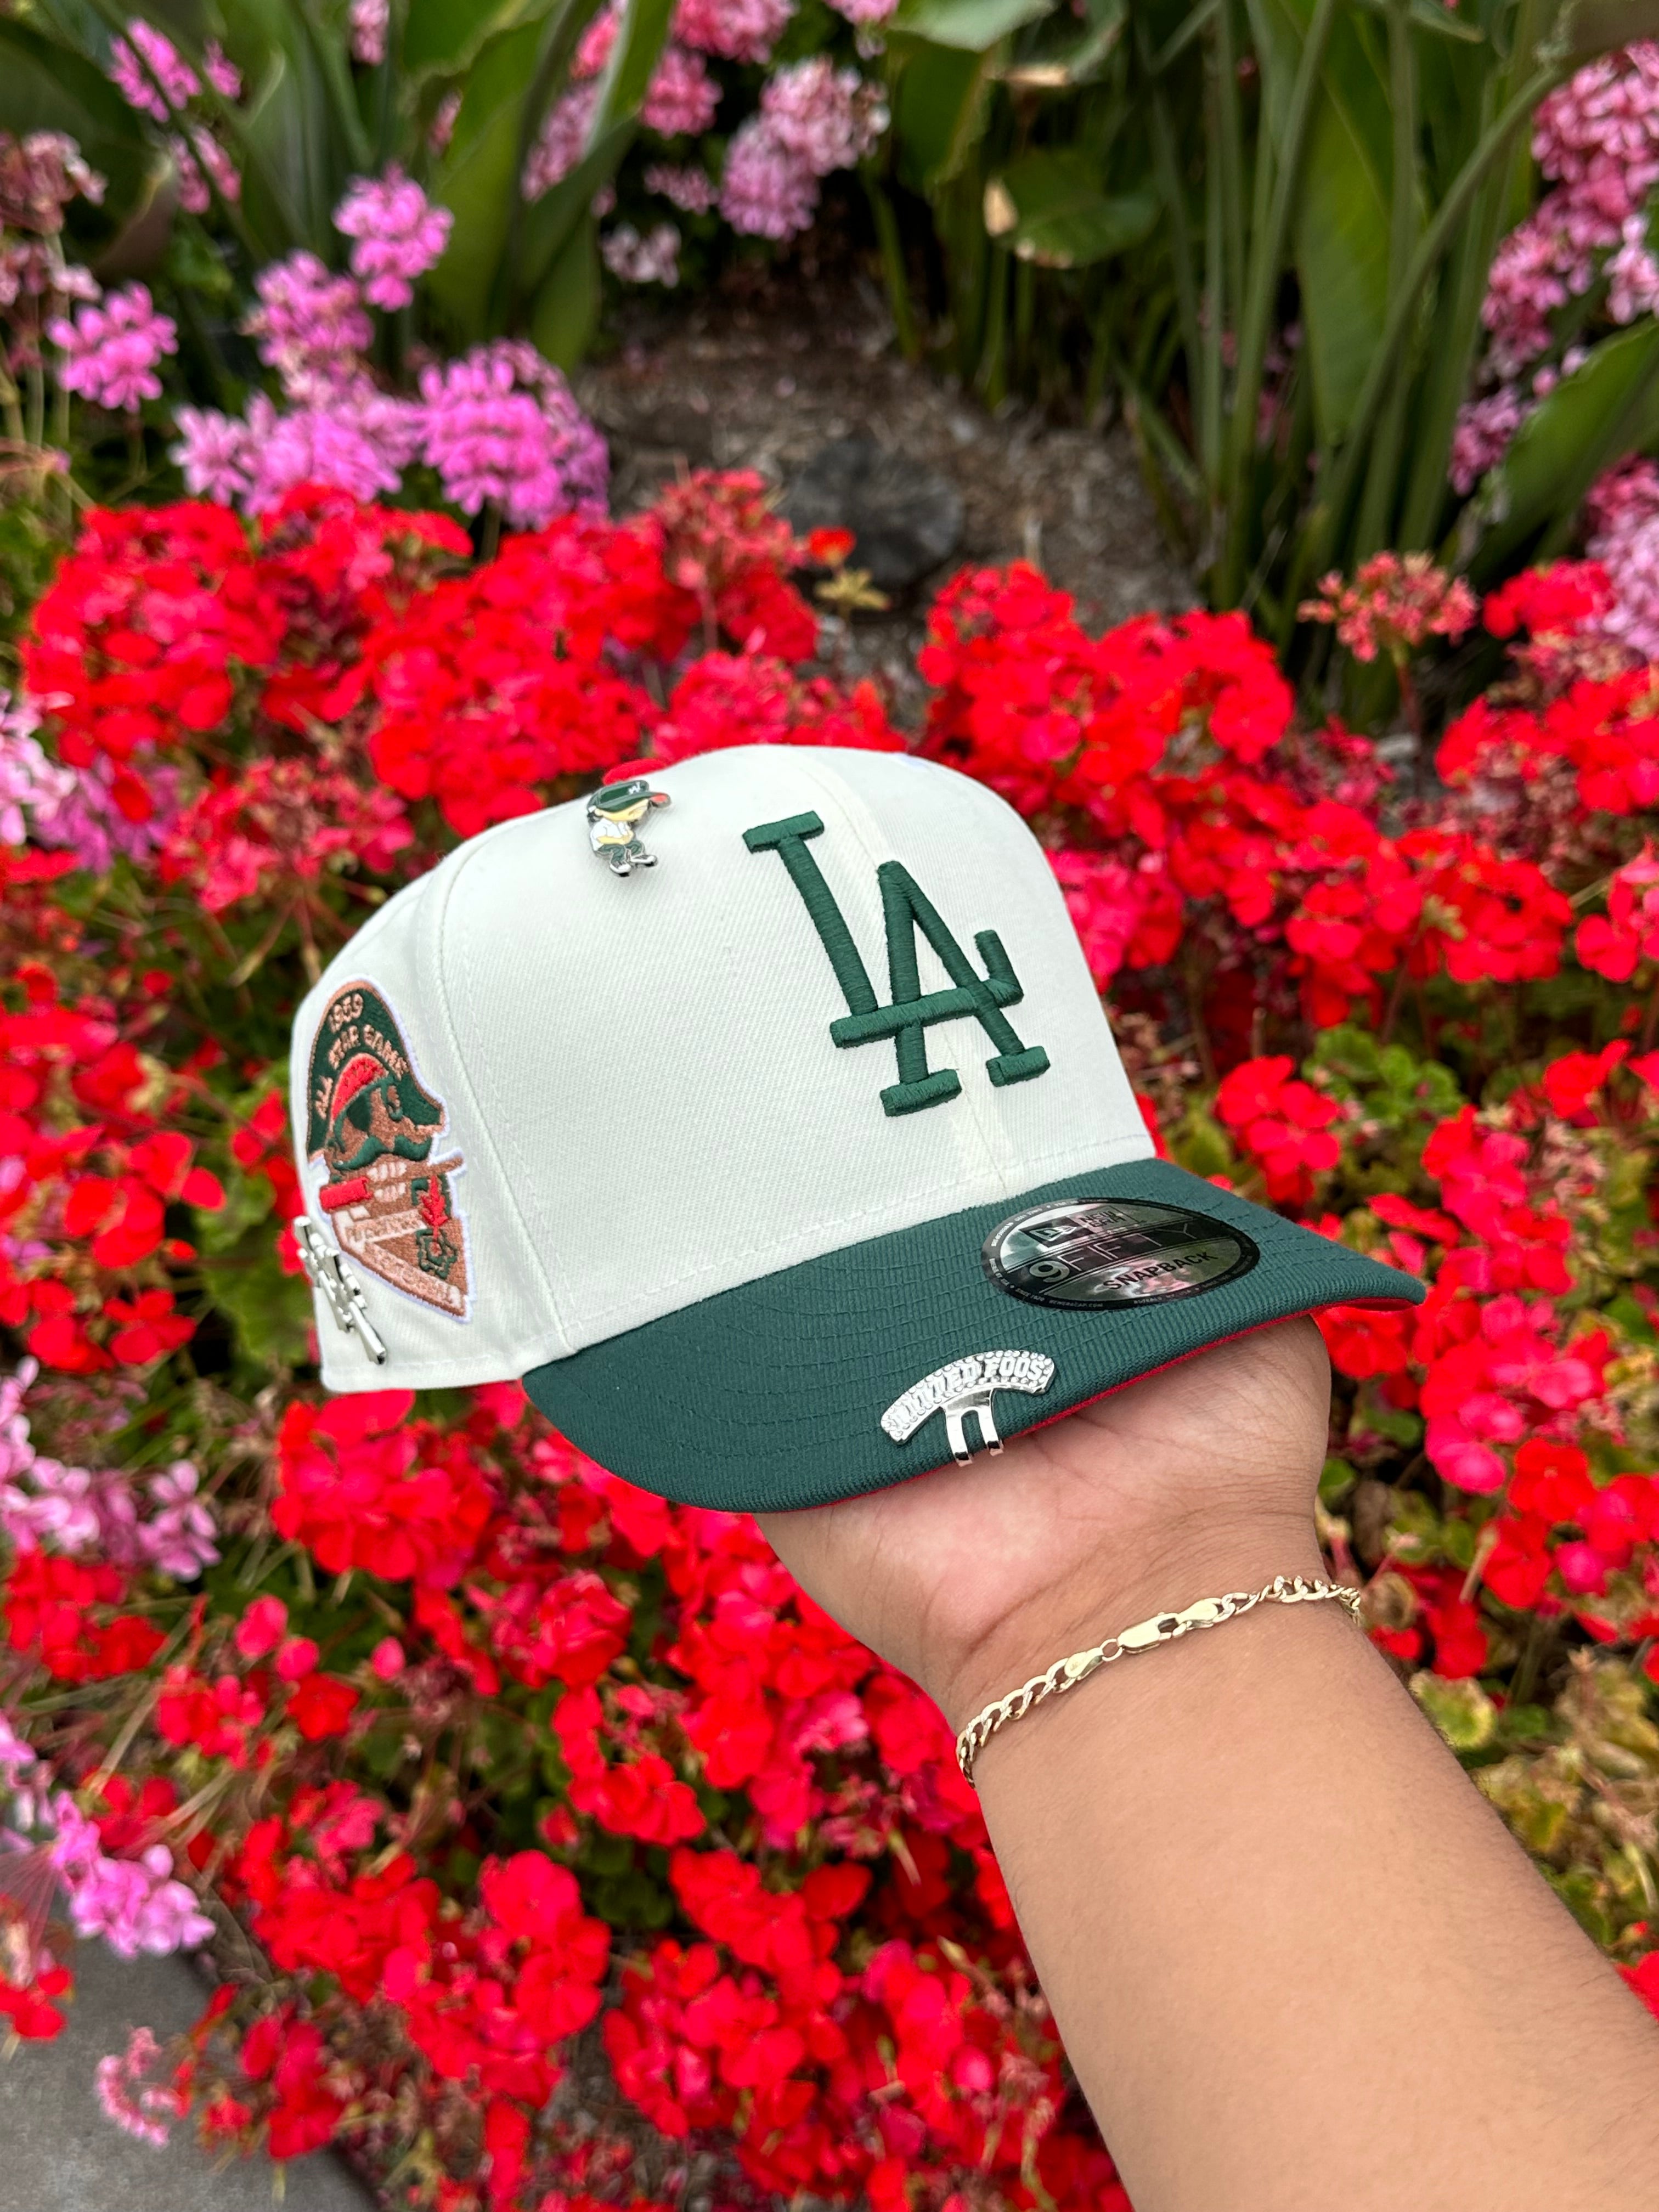 NEW ERA EXCLUSIVE 9FIFTY CHROME WHITE/GREEN LOS ANGELES DODGERS SNAPBACK W/ 1959 ALL STAR GAME SIDE PATCH